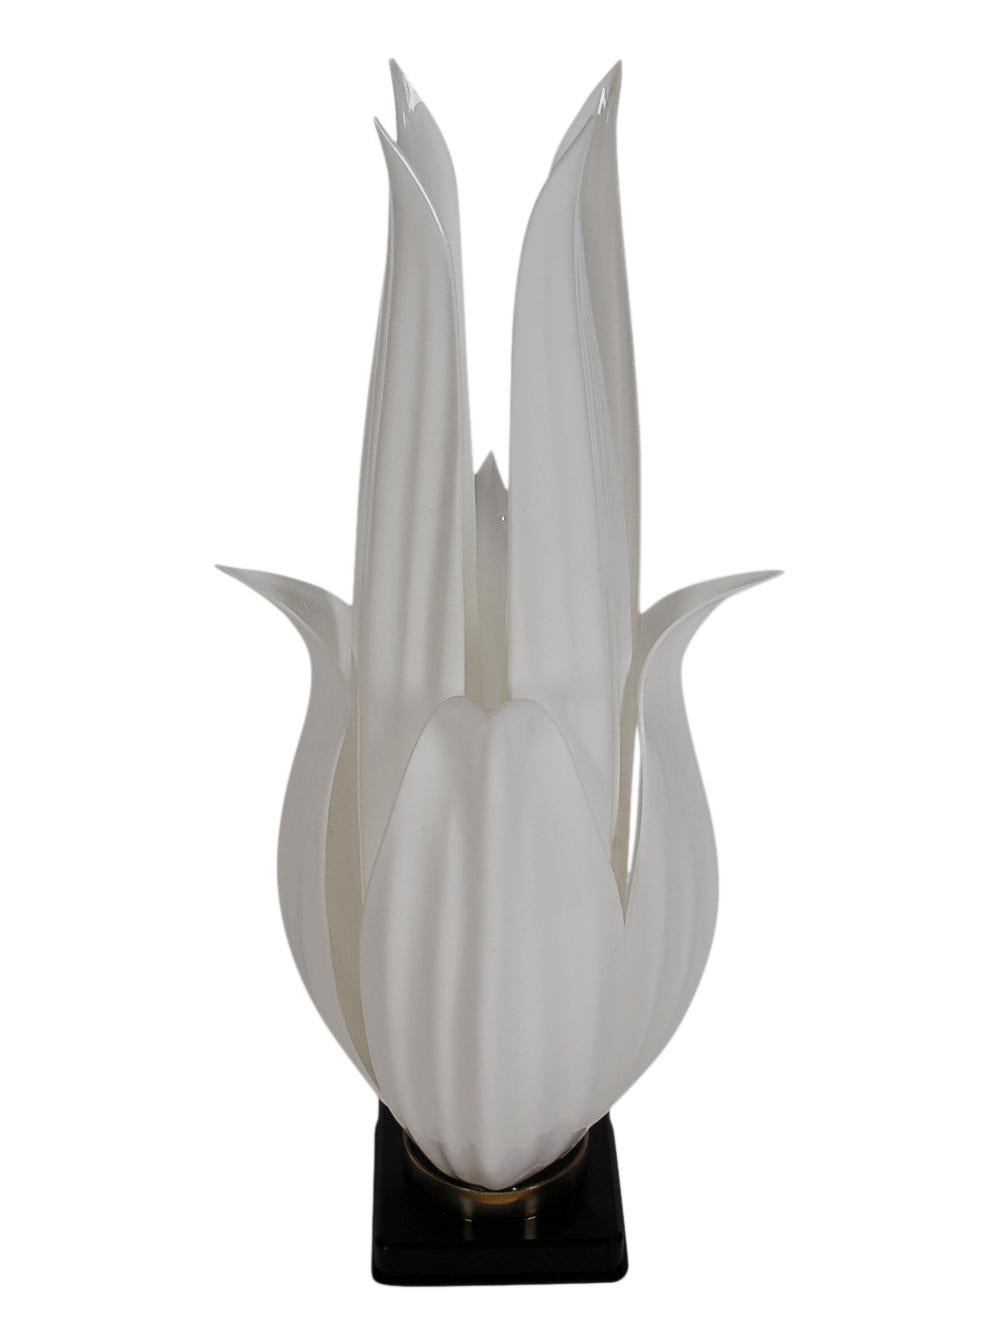 A sculptural beauty floral form table lamp made by Roger Rougier in the 1970s. The lamp features black and white acrylic with brass detail. Fully working and ready for use. Manufacturers label.